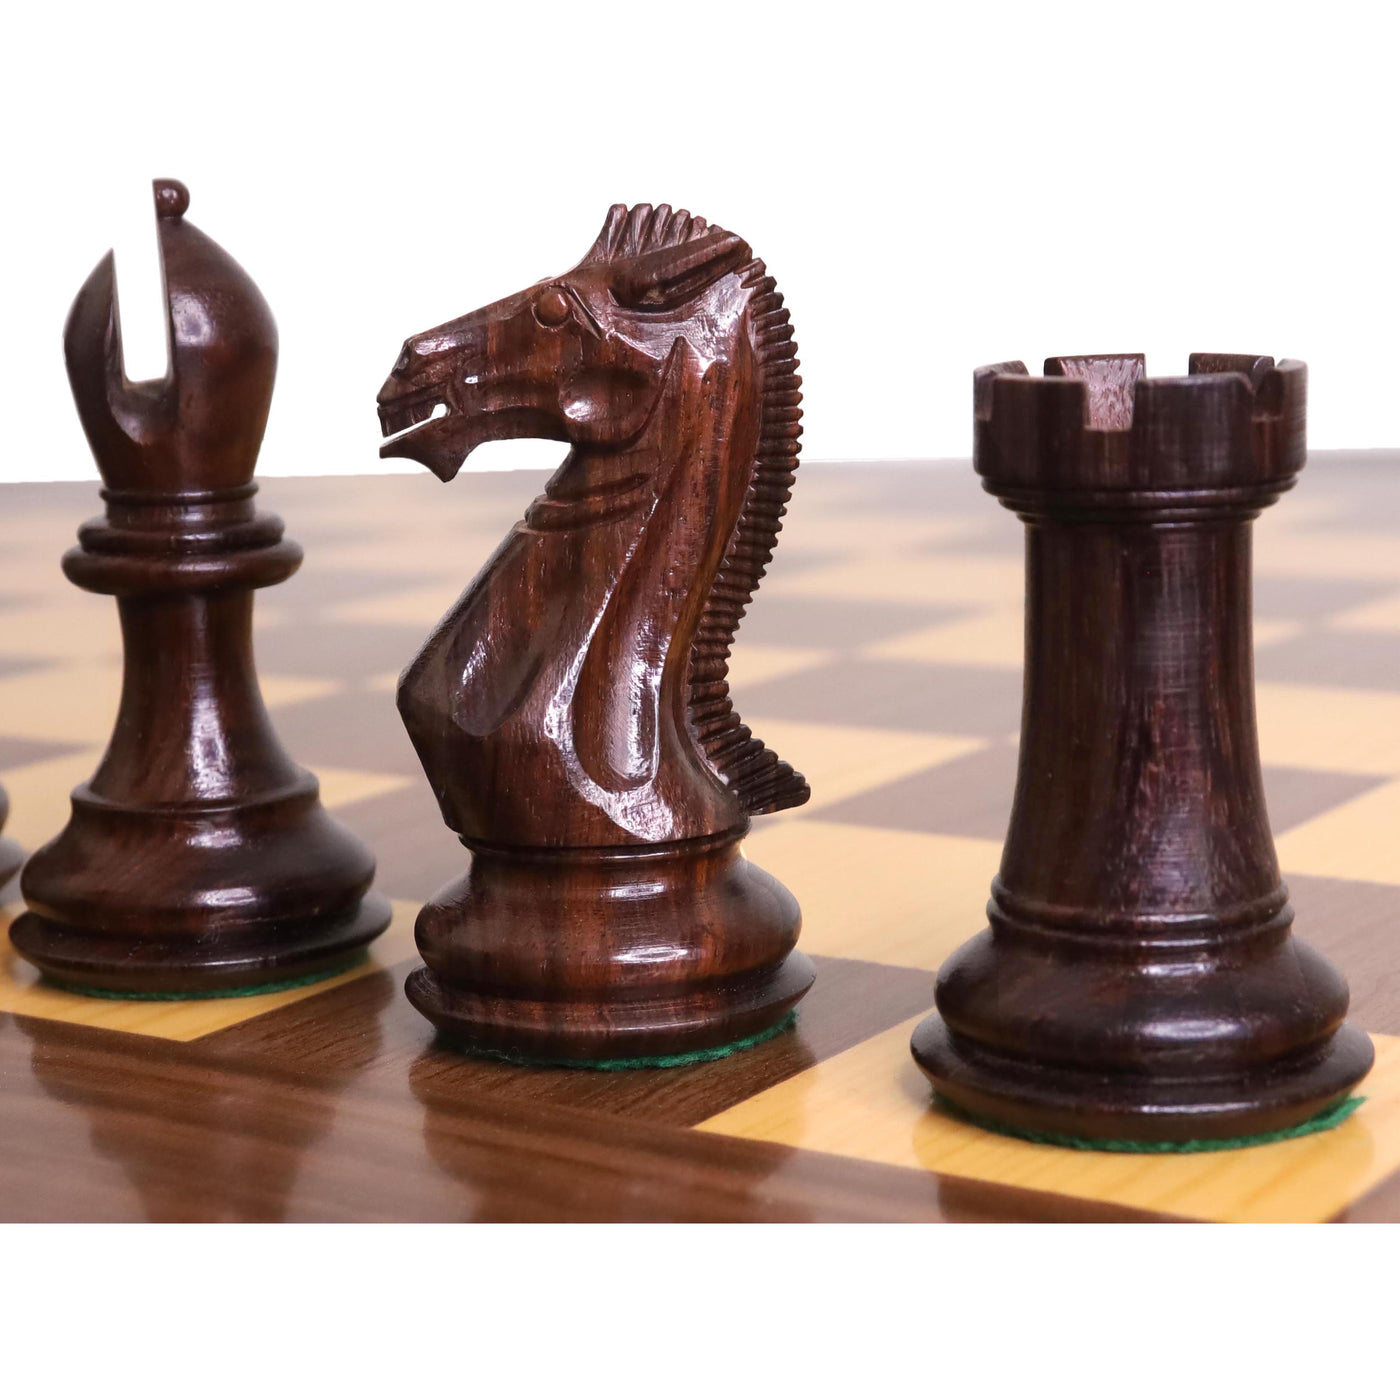 Slightly Imperfect 4.1″ Traveller Staunton Luxury Chess Pieces Only set – Triple Weighted Rosewood